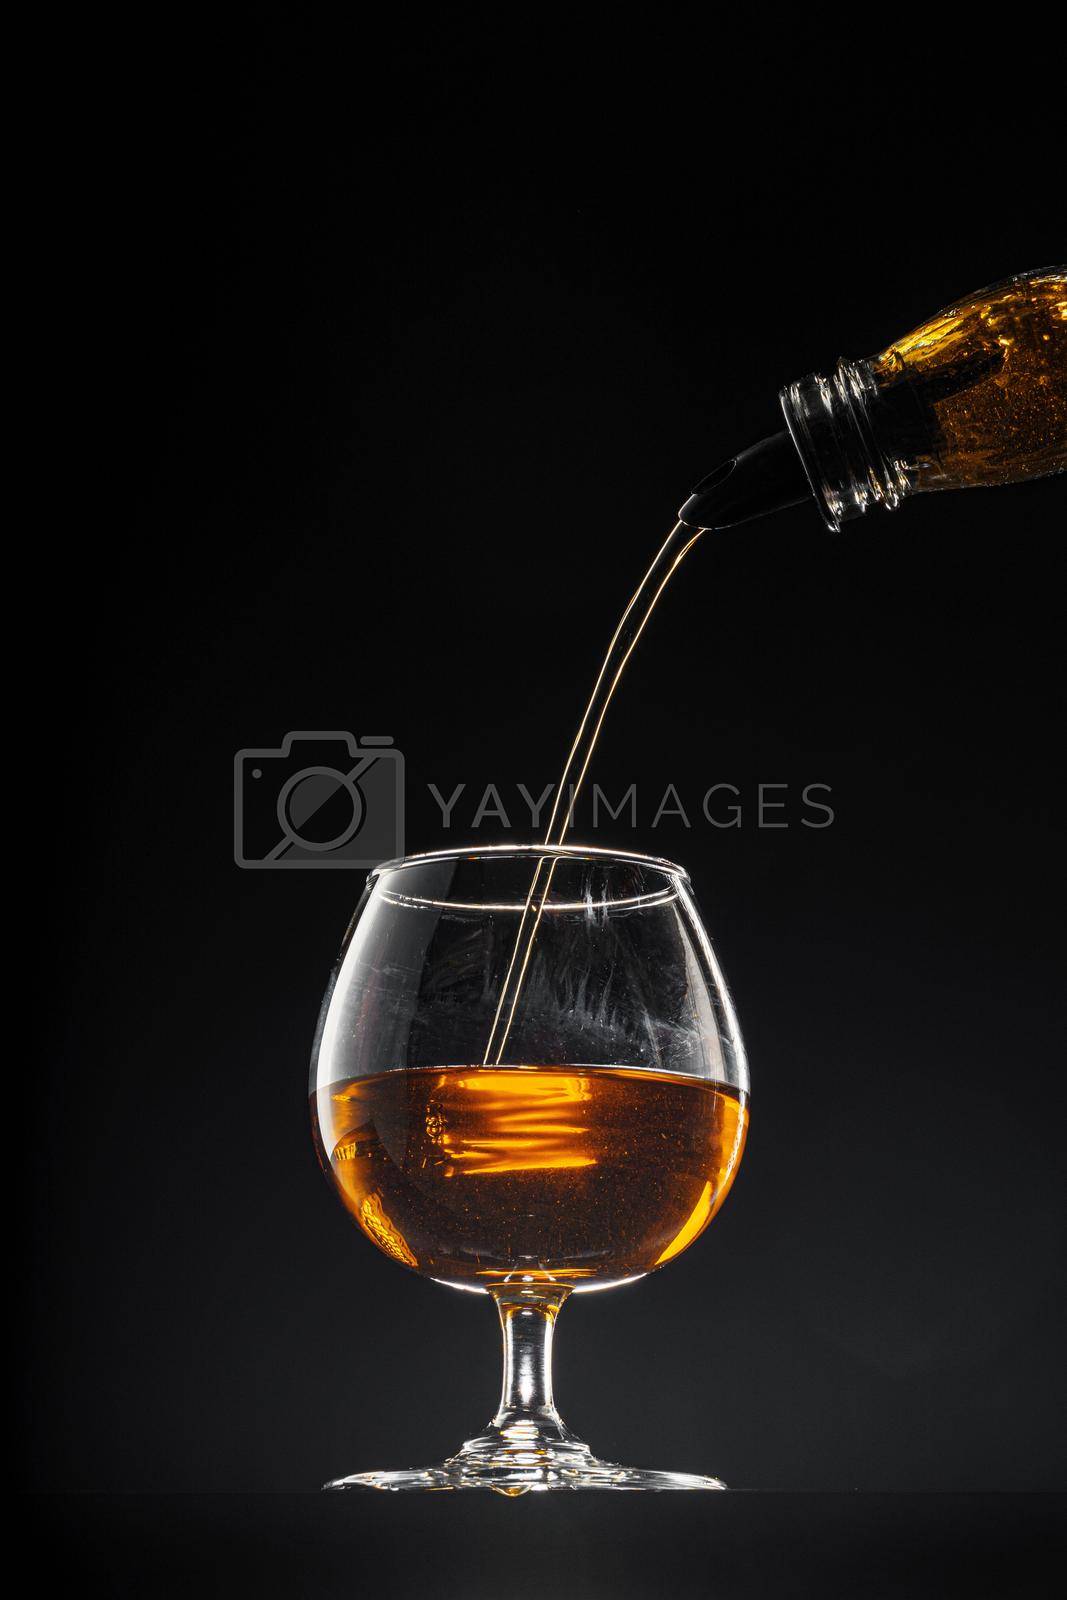 Royalty free image of Whisky pouring into a glass on black background by Fabrikasimf